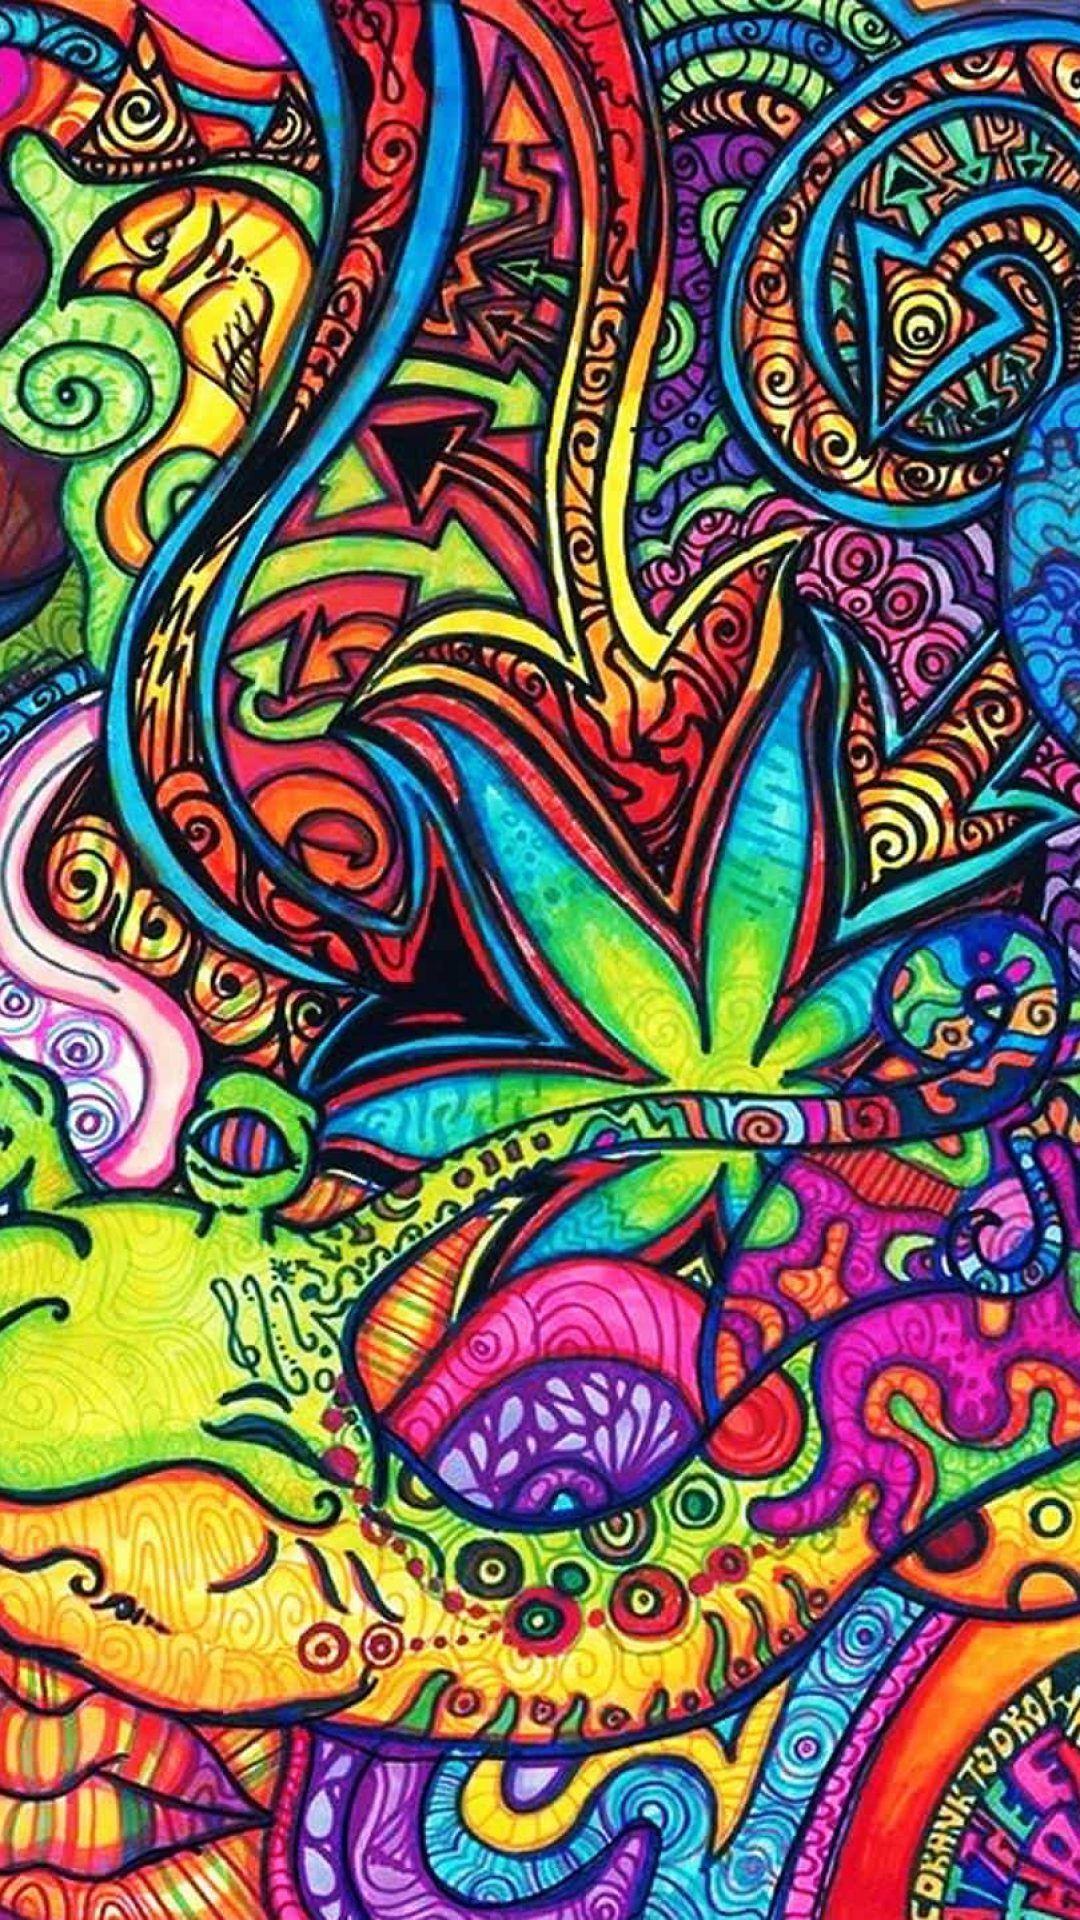 Psychedelic Live Wallpapers Ultra Hd 4k For Android Apk Download Explore 4k live wallpaper on wallpapersafari | find more items about 3k wallpaper, 4k wallpapers free download, 4k phone wallpaper. psychedelic live wallpapers ultra hd 4k